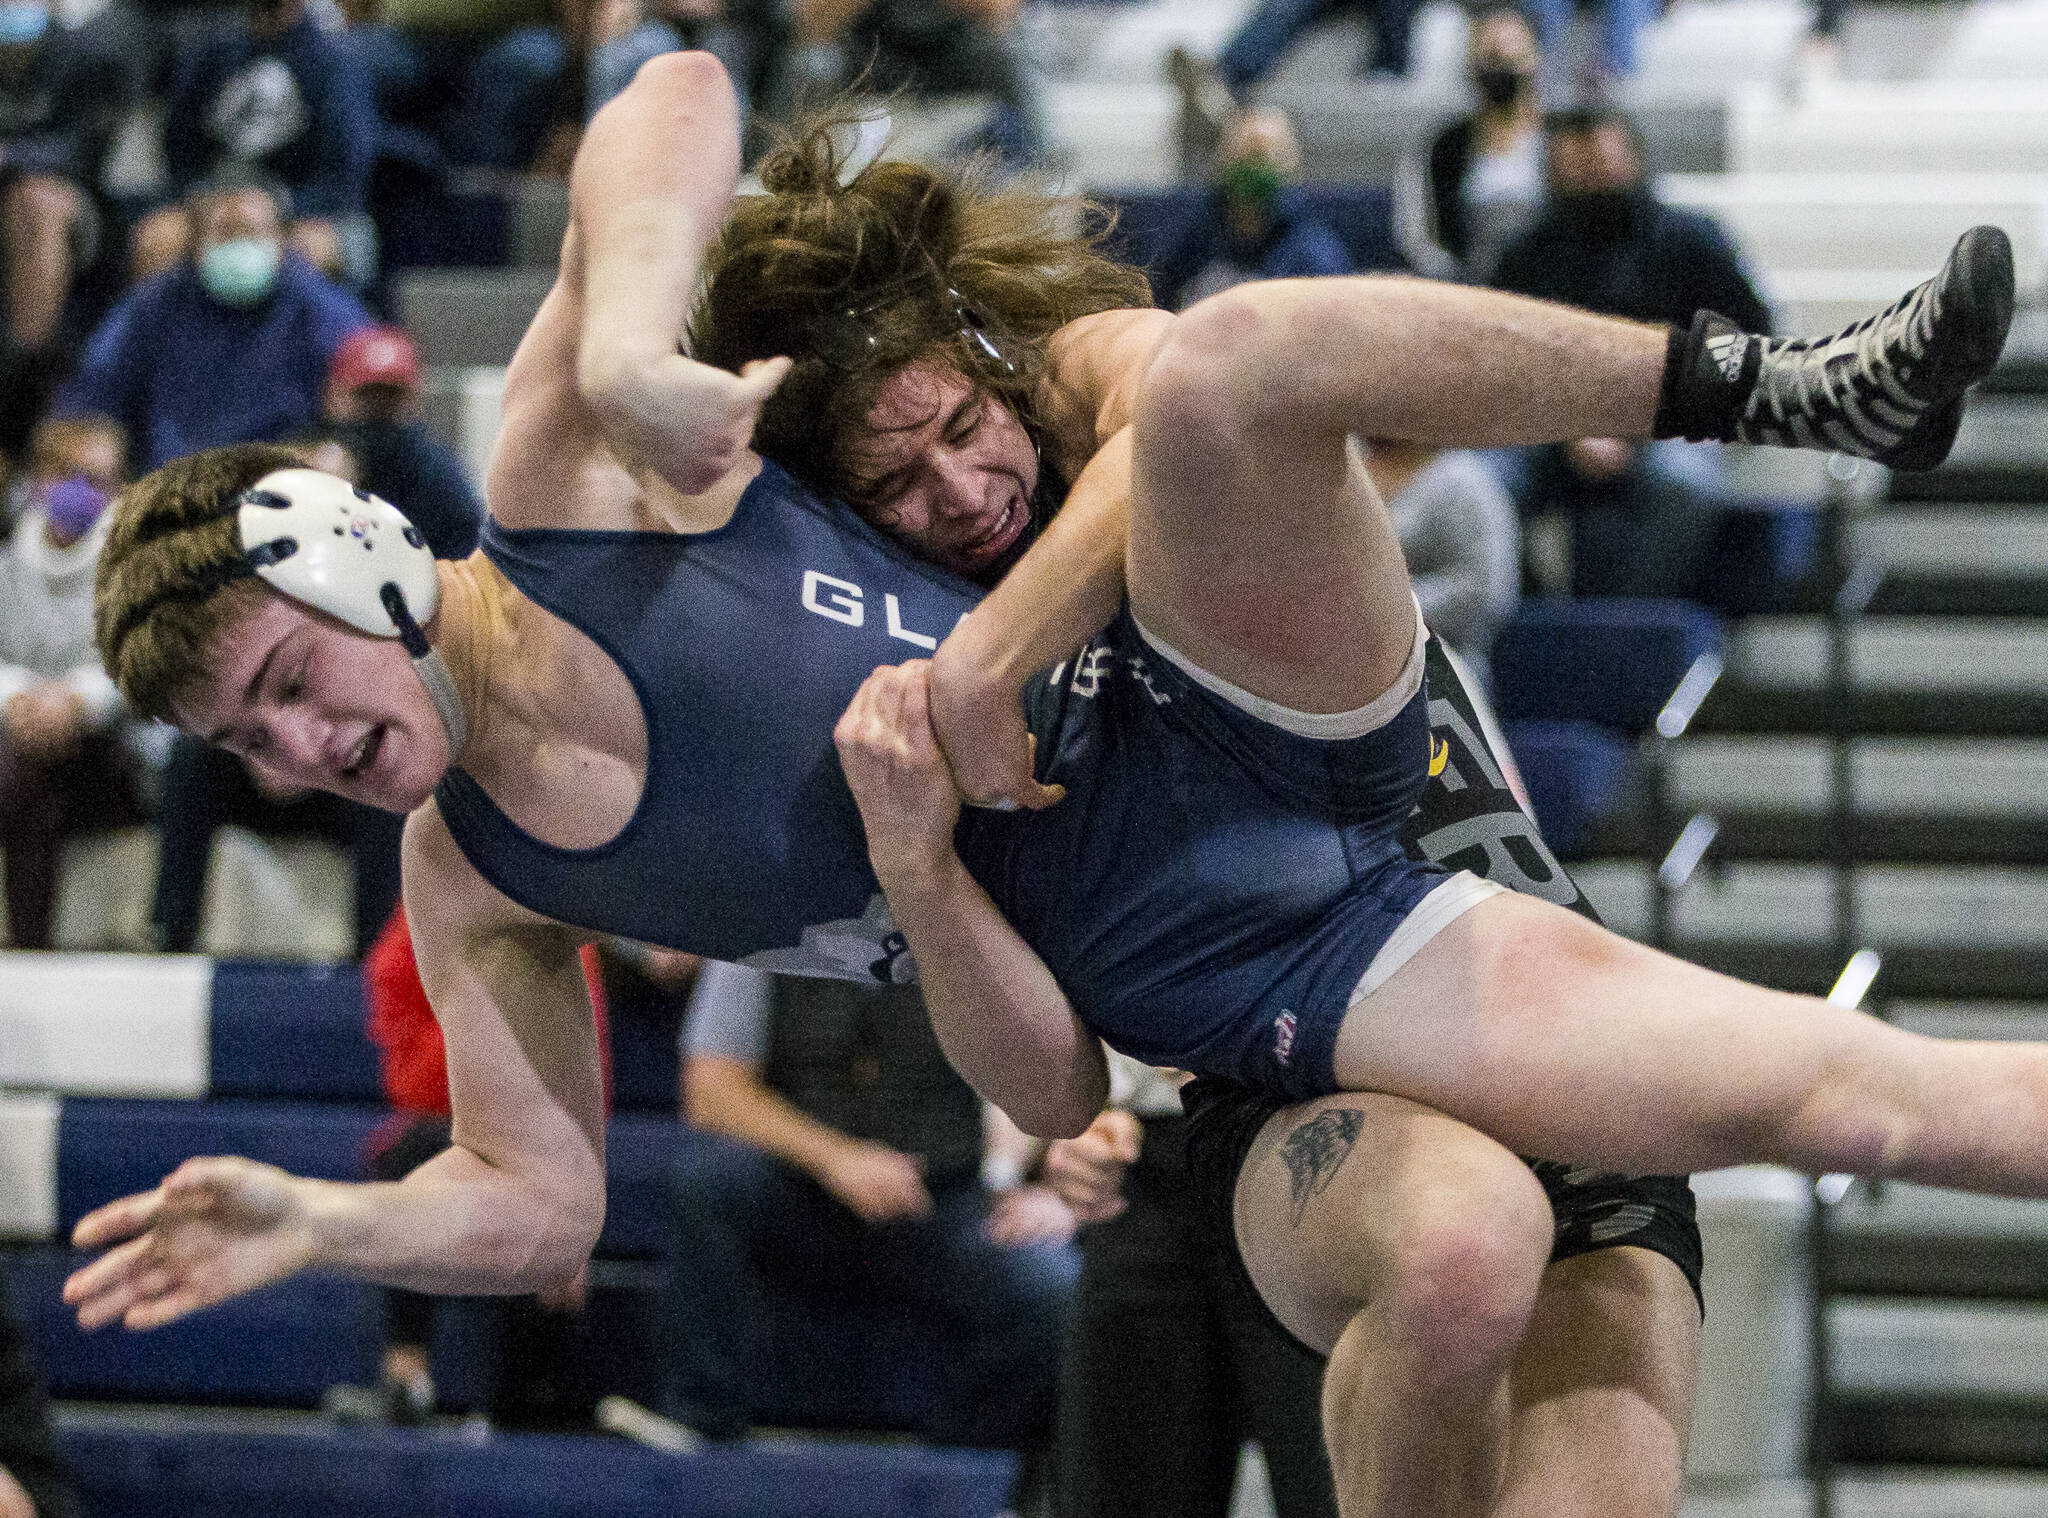 Lake Stevens’ Tyler Fouts lifts Glacier Peak’s Gil Mossburg during a wrestling match Jan. 18 in Snohomish. Fouts is ranked No. 2 in Class 4A at 145 pounds by Washington Wrestling Report. (Olivia Vanni / The Herald)